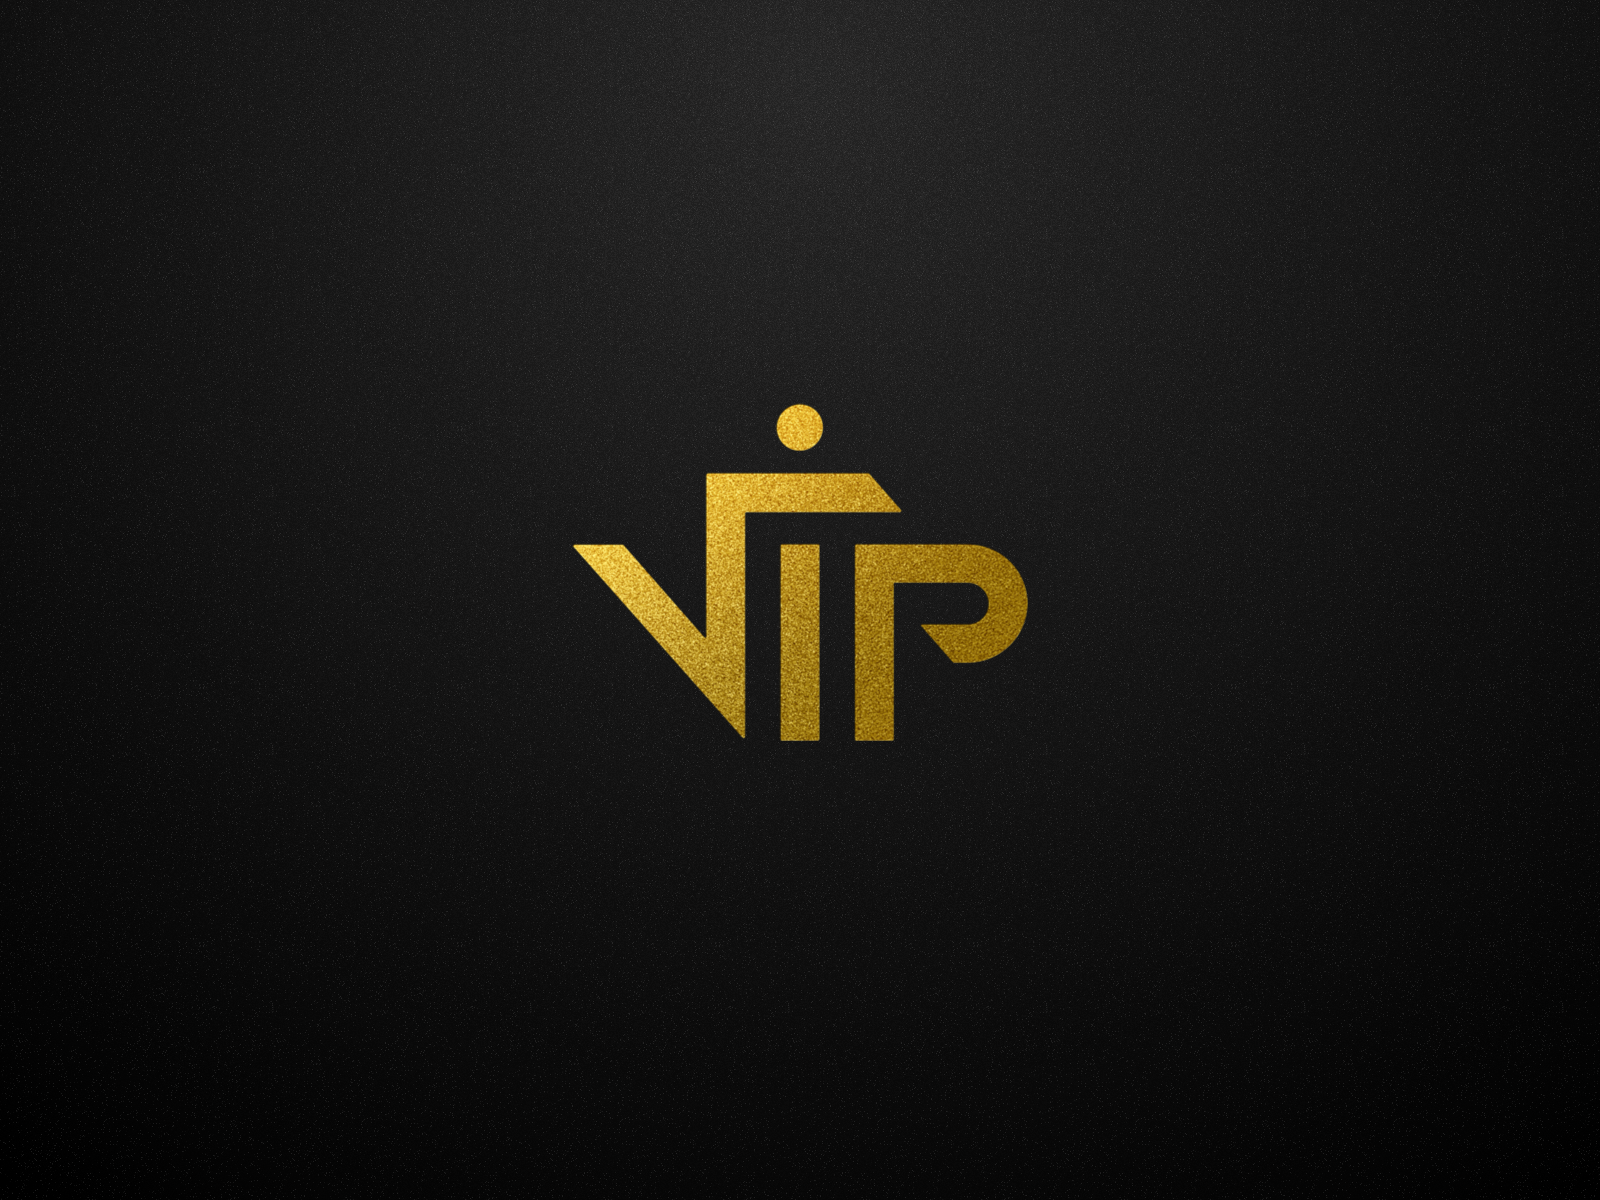 VIP LOGO DESING by Lionel on Dribbble